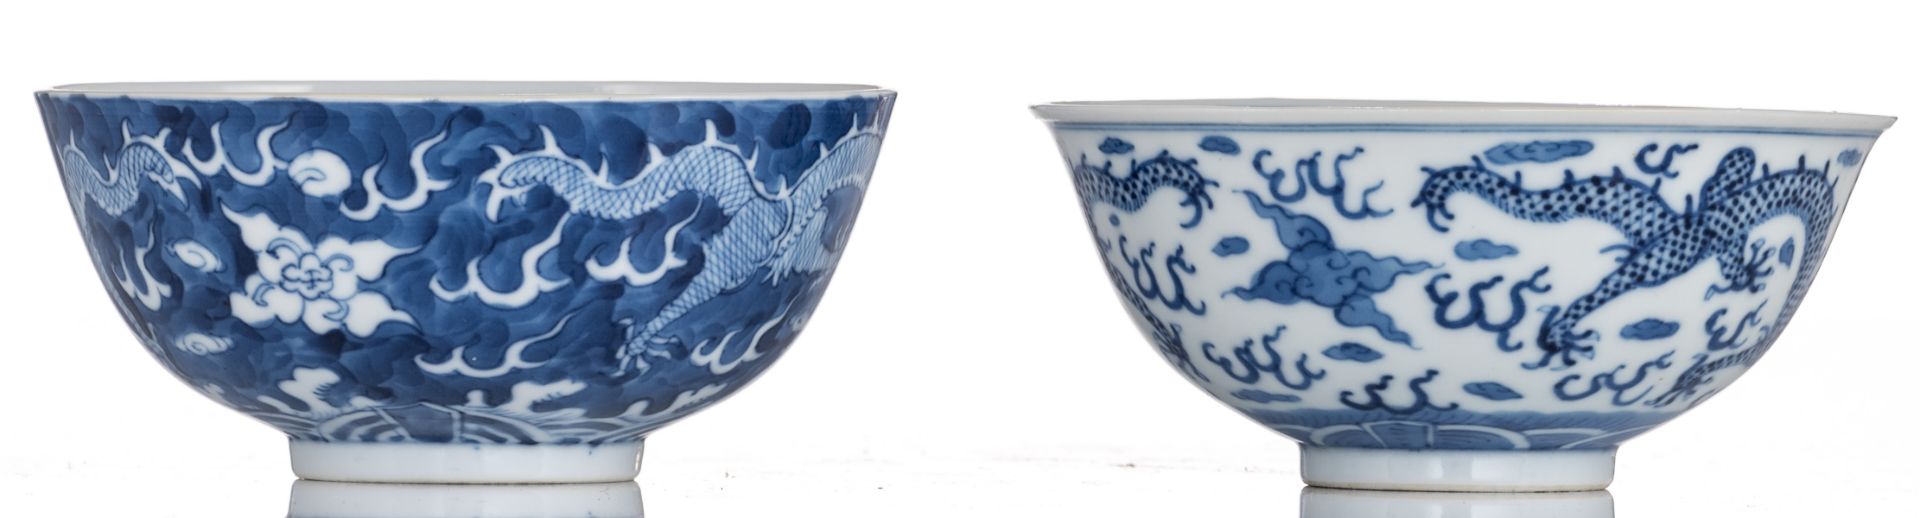 Two Chinese blue and white dragon decorated bowls, with a Kangxi mark, H 5,5 - 6 - ø 12,5 - 13 cm - Image 4 of 7